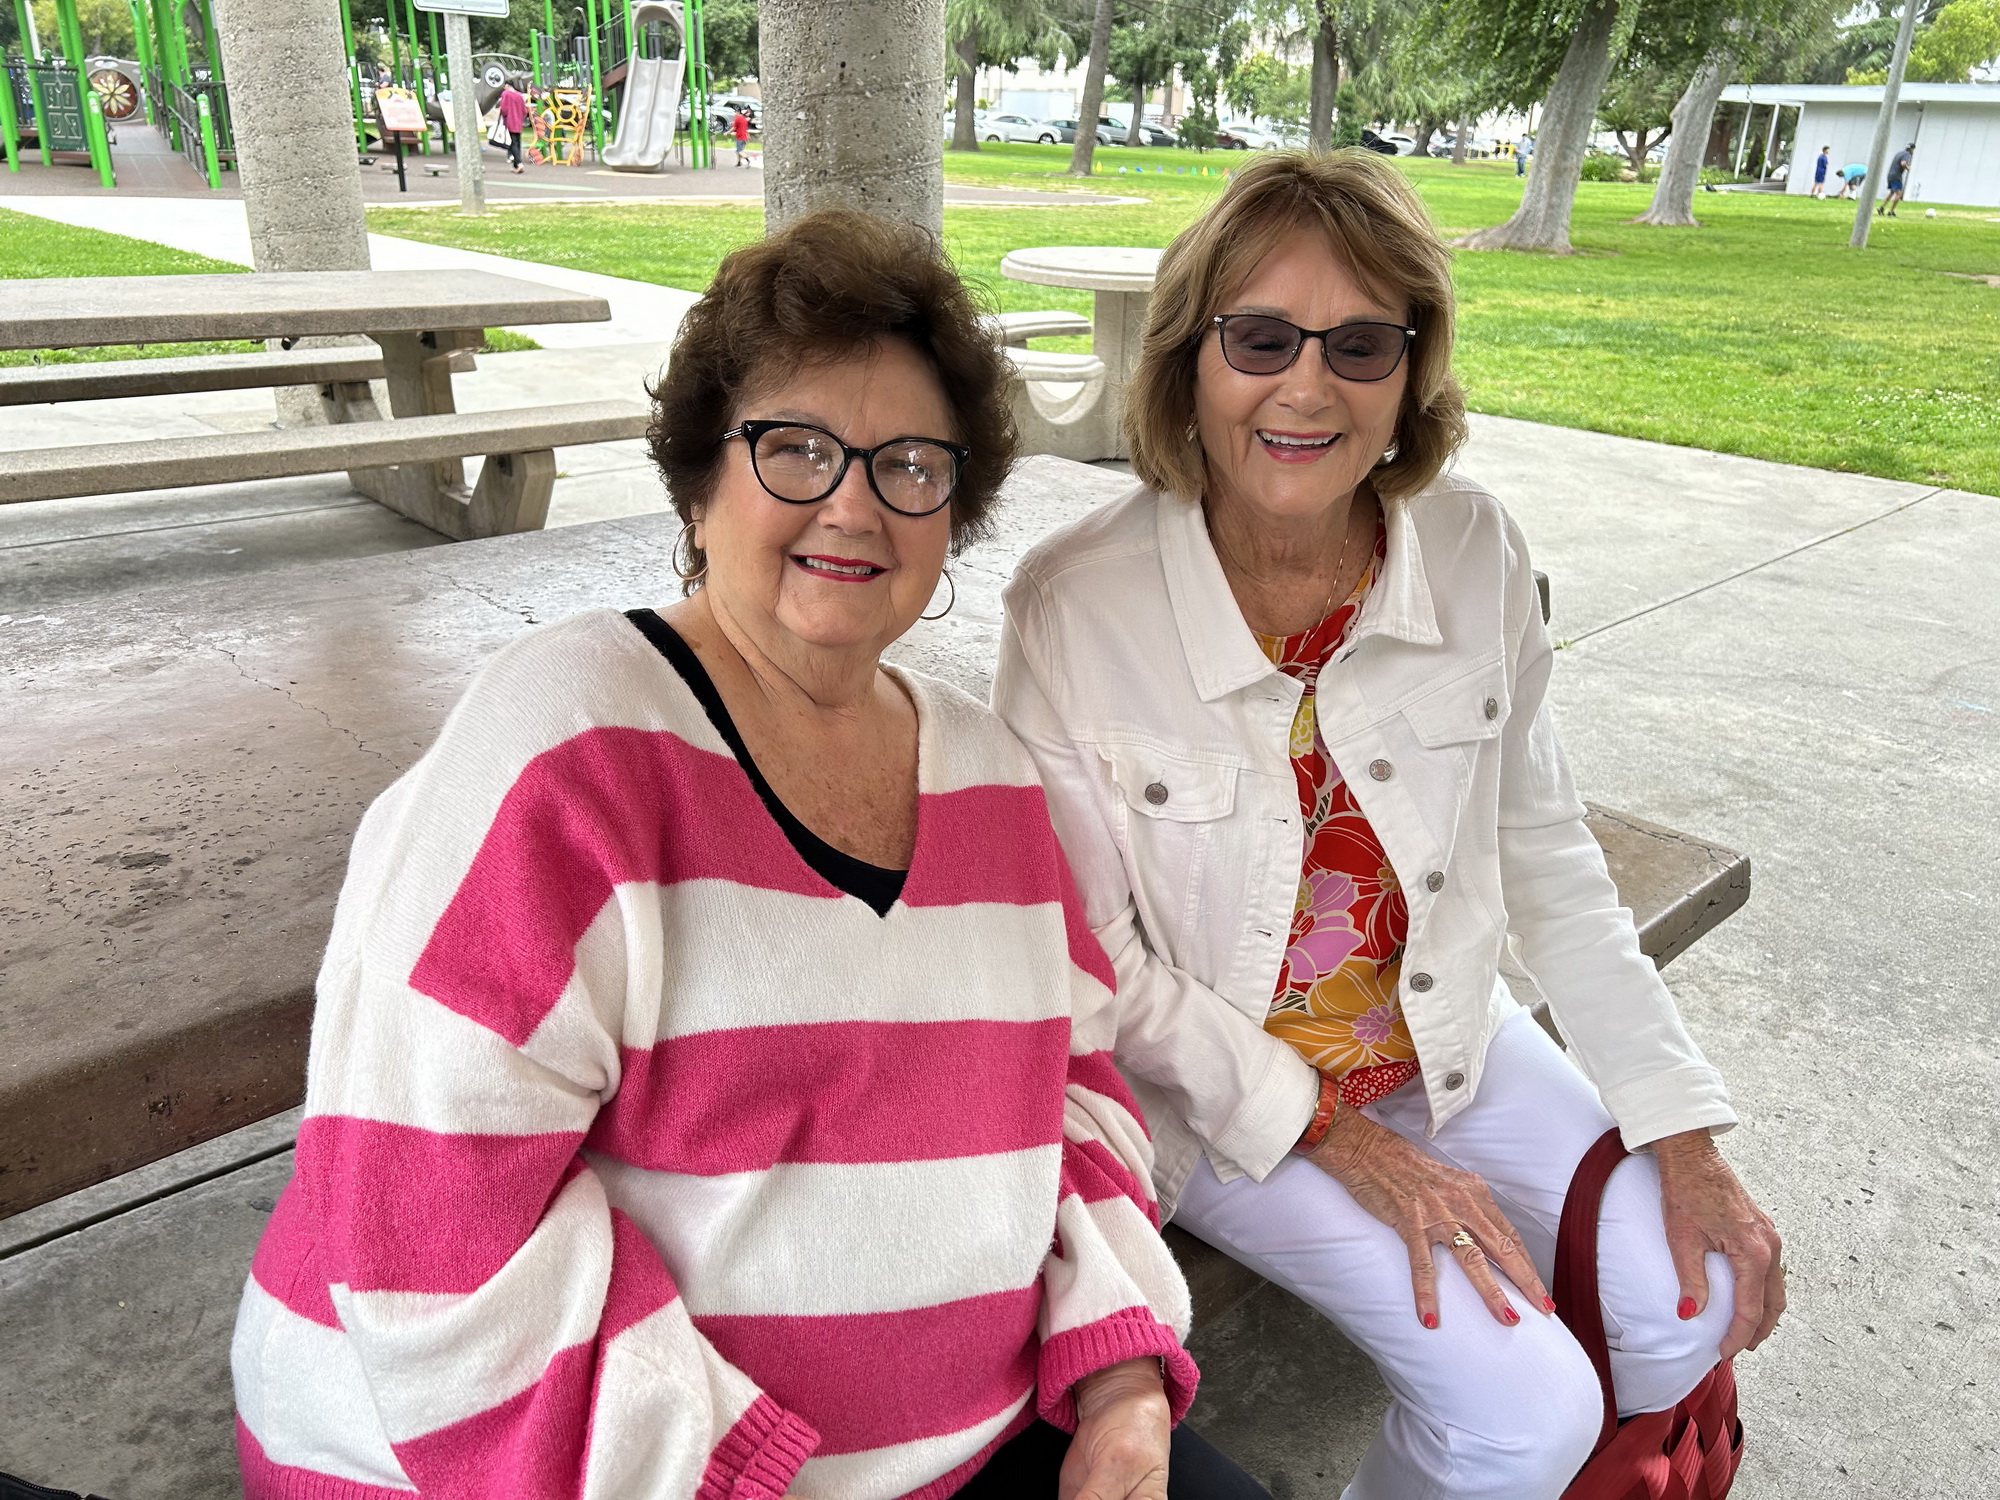 23-06-18-Class of 56 Reunion at CHS Caryl Sansteby and Marilyn Berryman_No_03_resize